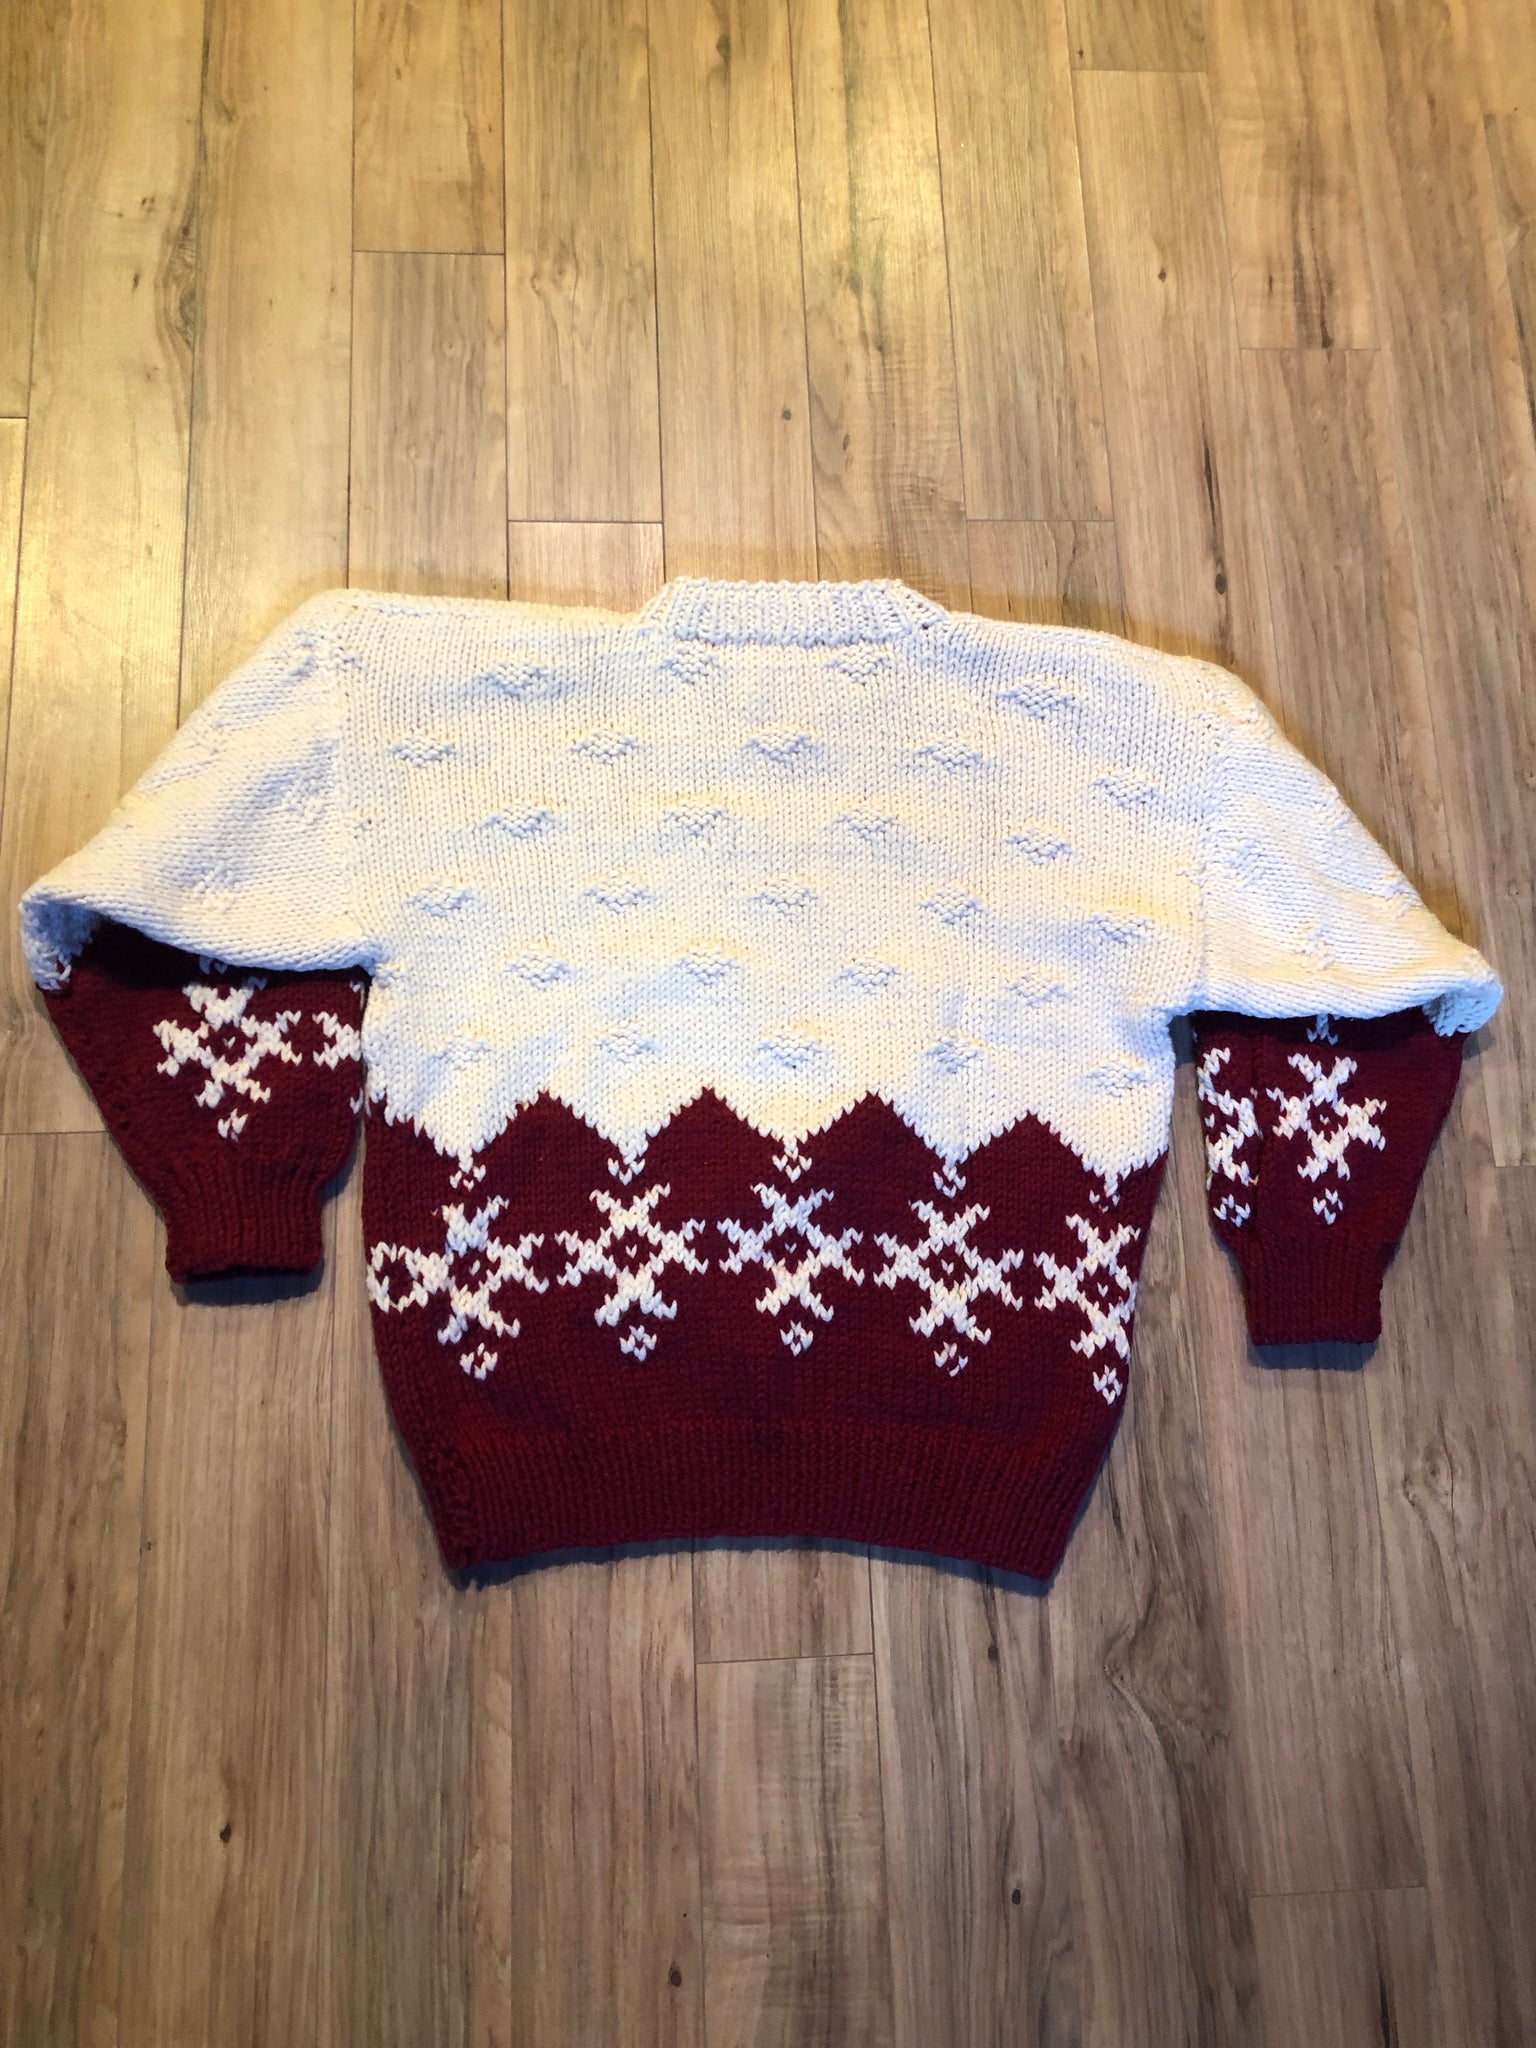 Vintage Hand-Knit burgundy and white wool sweater, Made in Nova